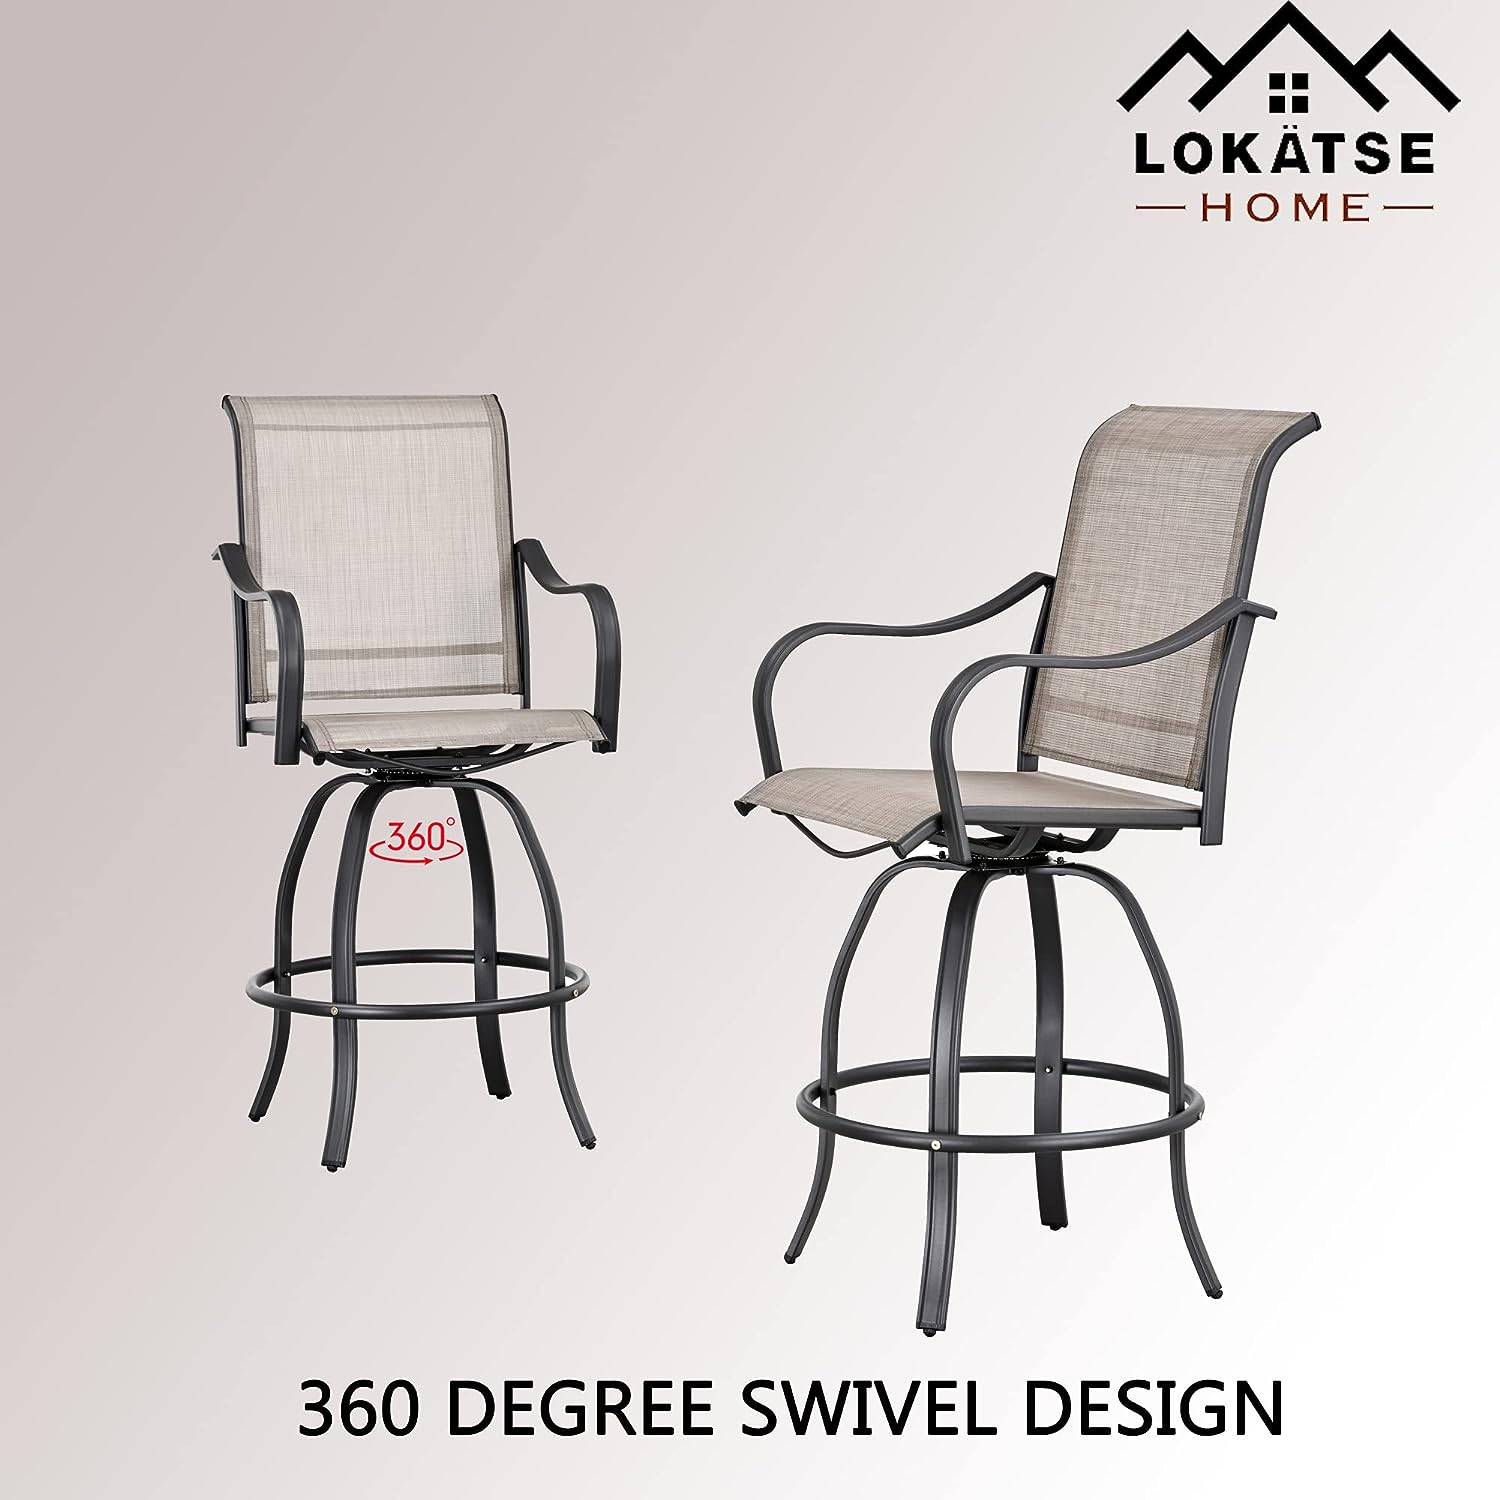 Festival Depot 4 Piece Bar Bistro Patio Dining Chairs Textilene High Stools 360° Swivel Chairs with Curved Armrest with Metal Frame Outdoor Furniture for Lawn Garden Pool All-Weather